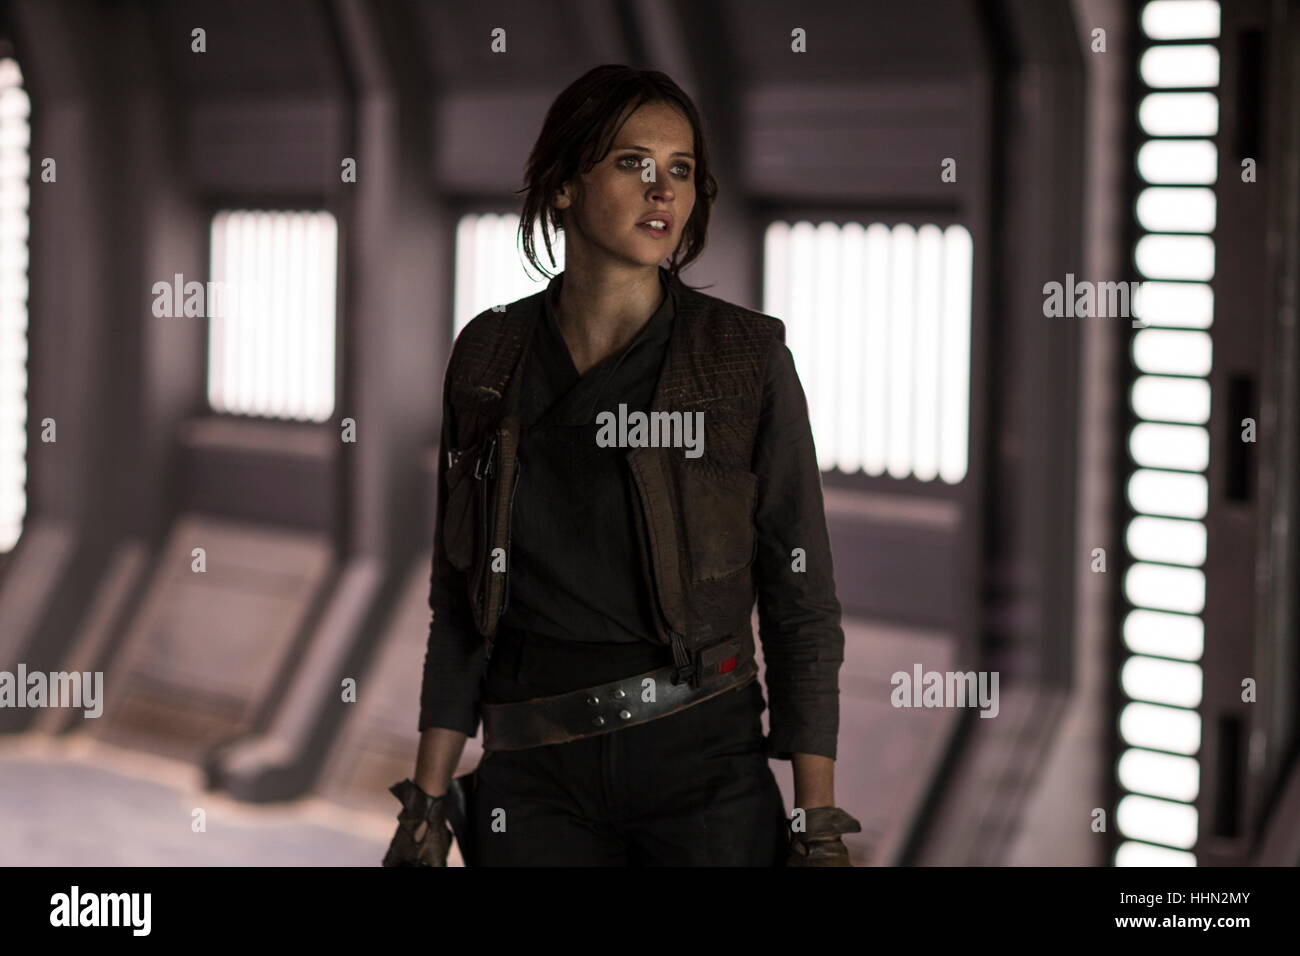 Jyn Erso Stock Photos Jyn Erso Stock Images Alamy Images, Photos, Reviews